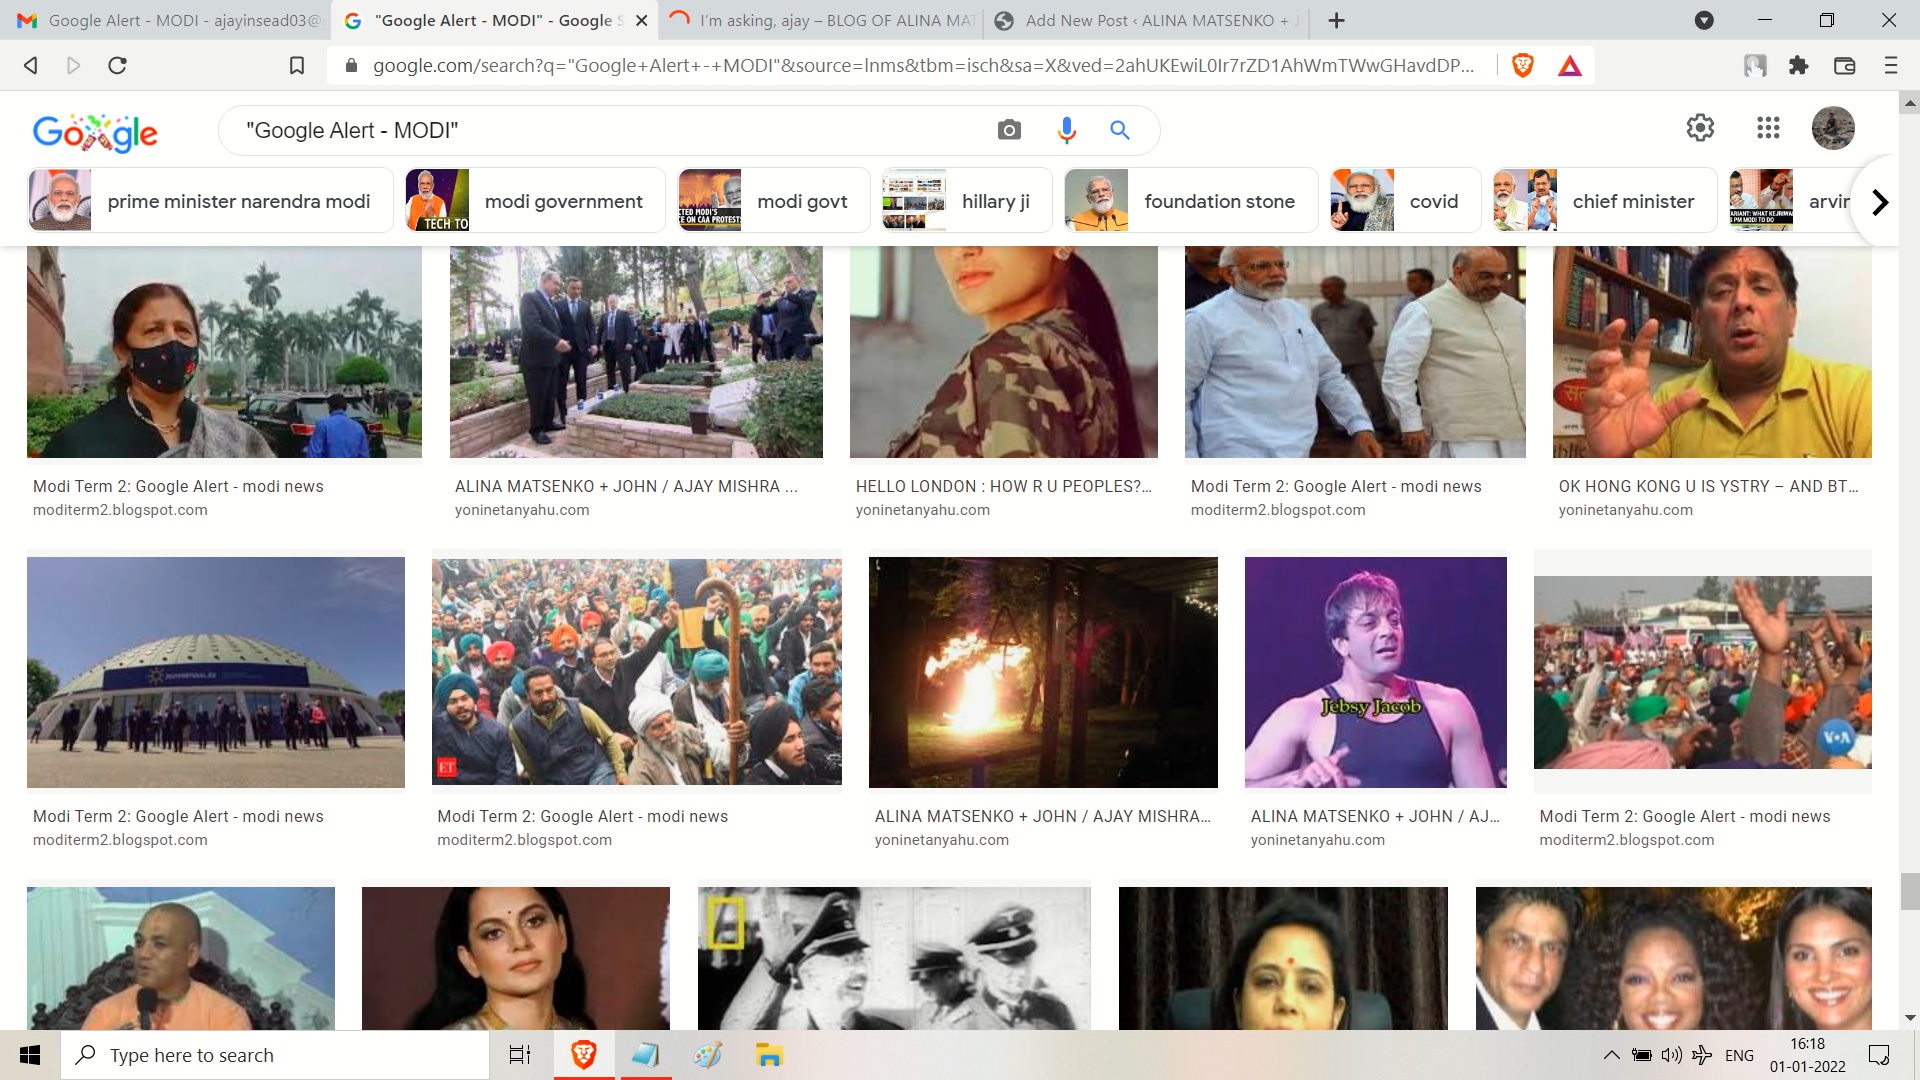 GOOGLE ALERT MODI HAPPY NEAY TYERA RAHUL GANDHI SIR AND MODI JI AND MRSSONIA GANDHI AD MSULIMS ALSO NOTJUST TO BRAHMIAND JEWS ONLY BUT END OWSIS AND KAHSN HATEED -- ---